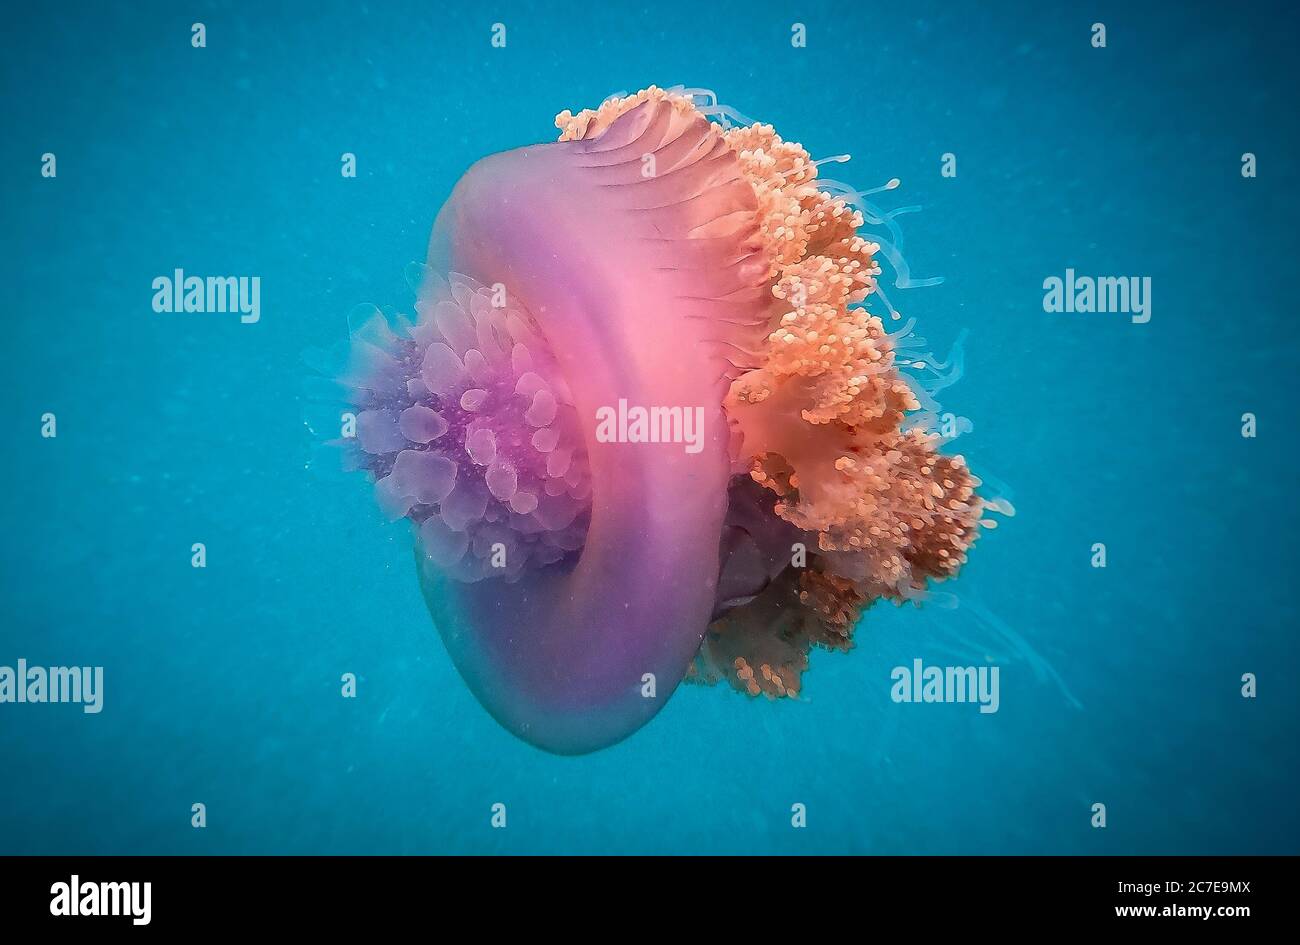 Crowned jellyfish swimming in blue water Stock Photo